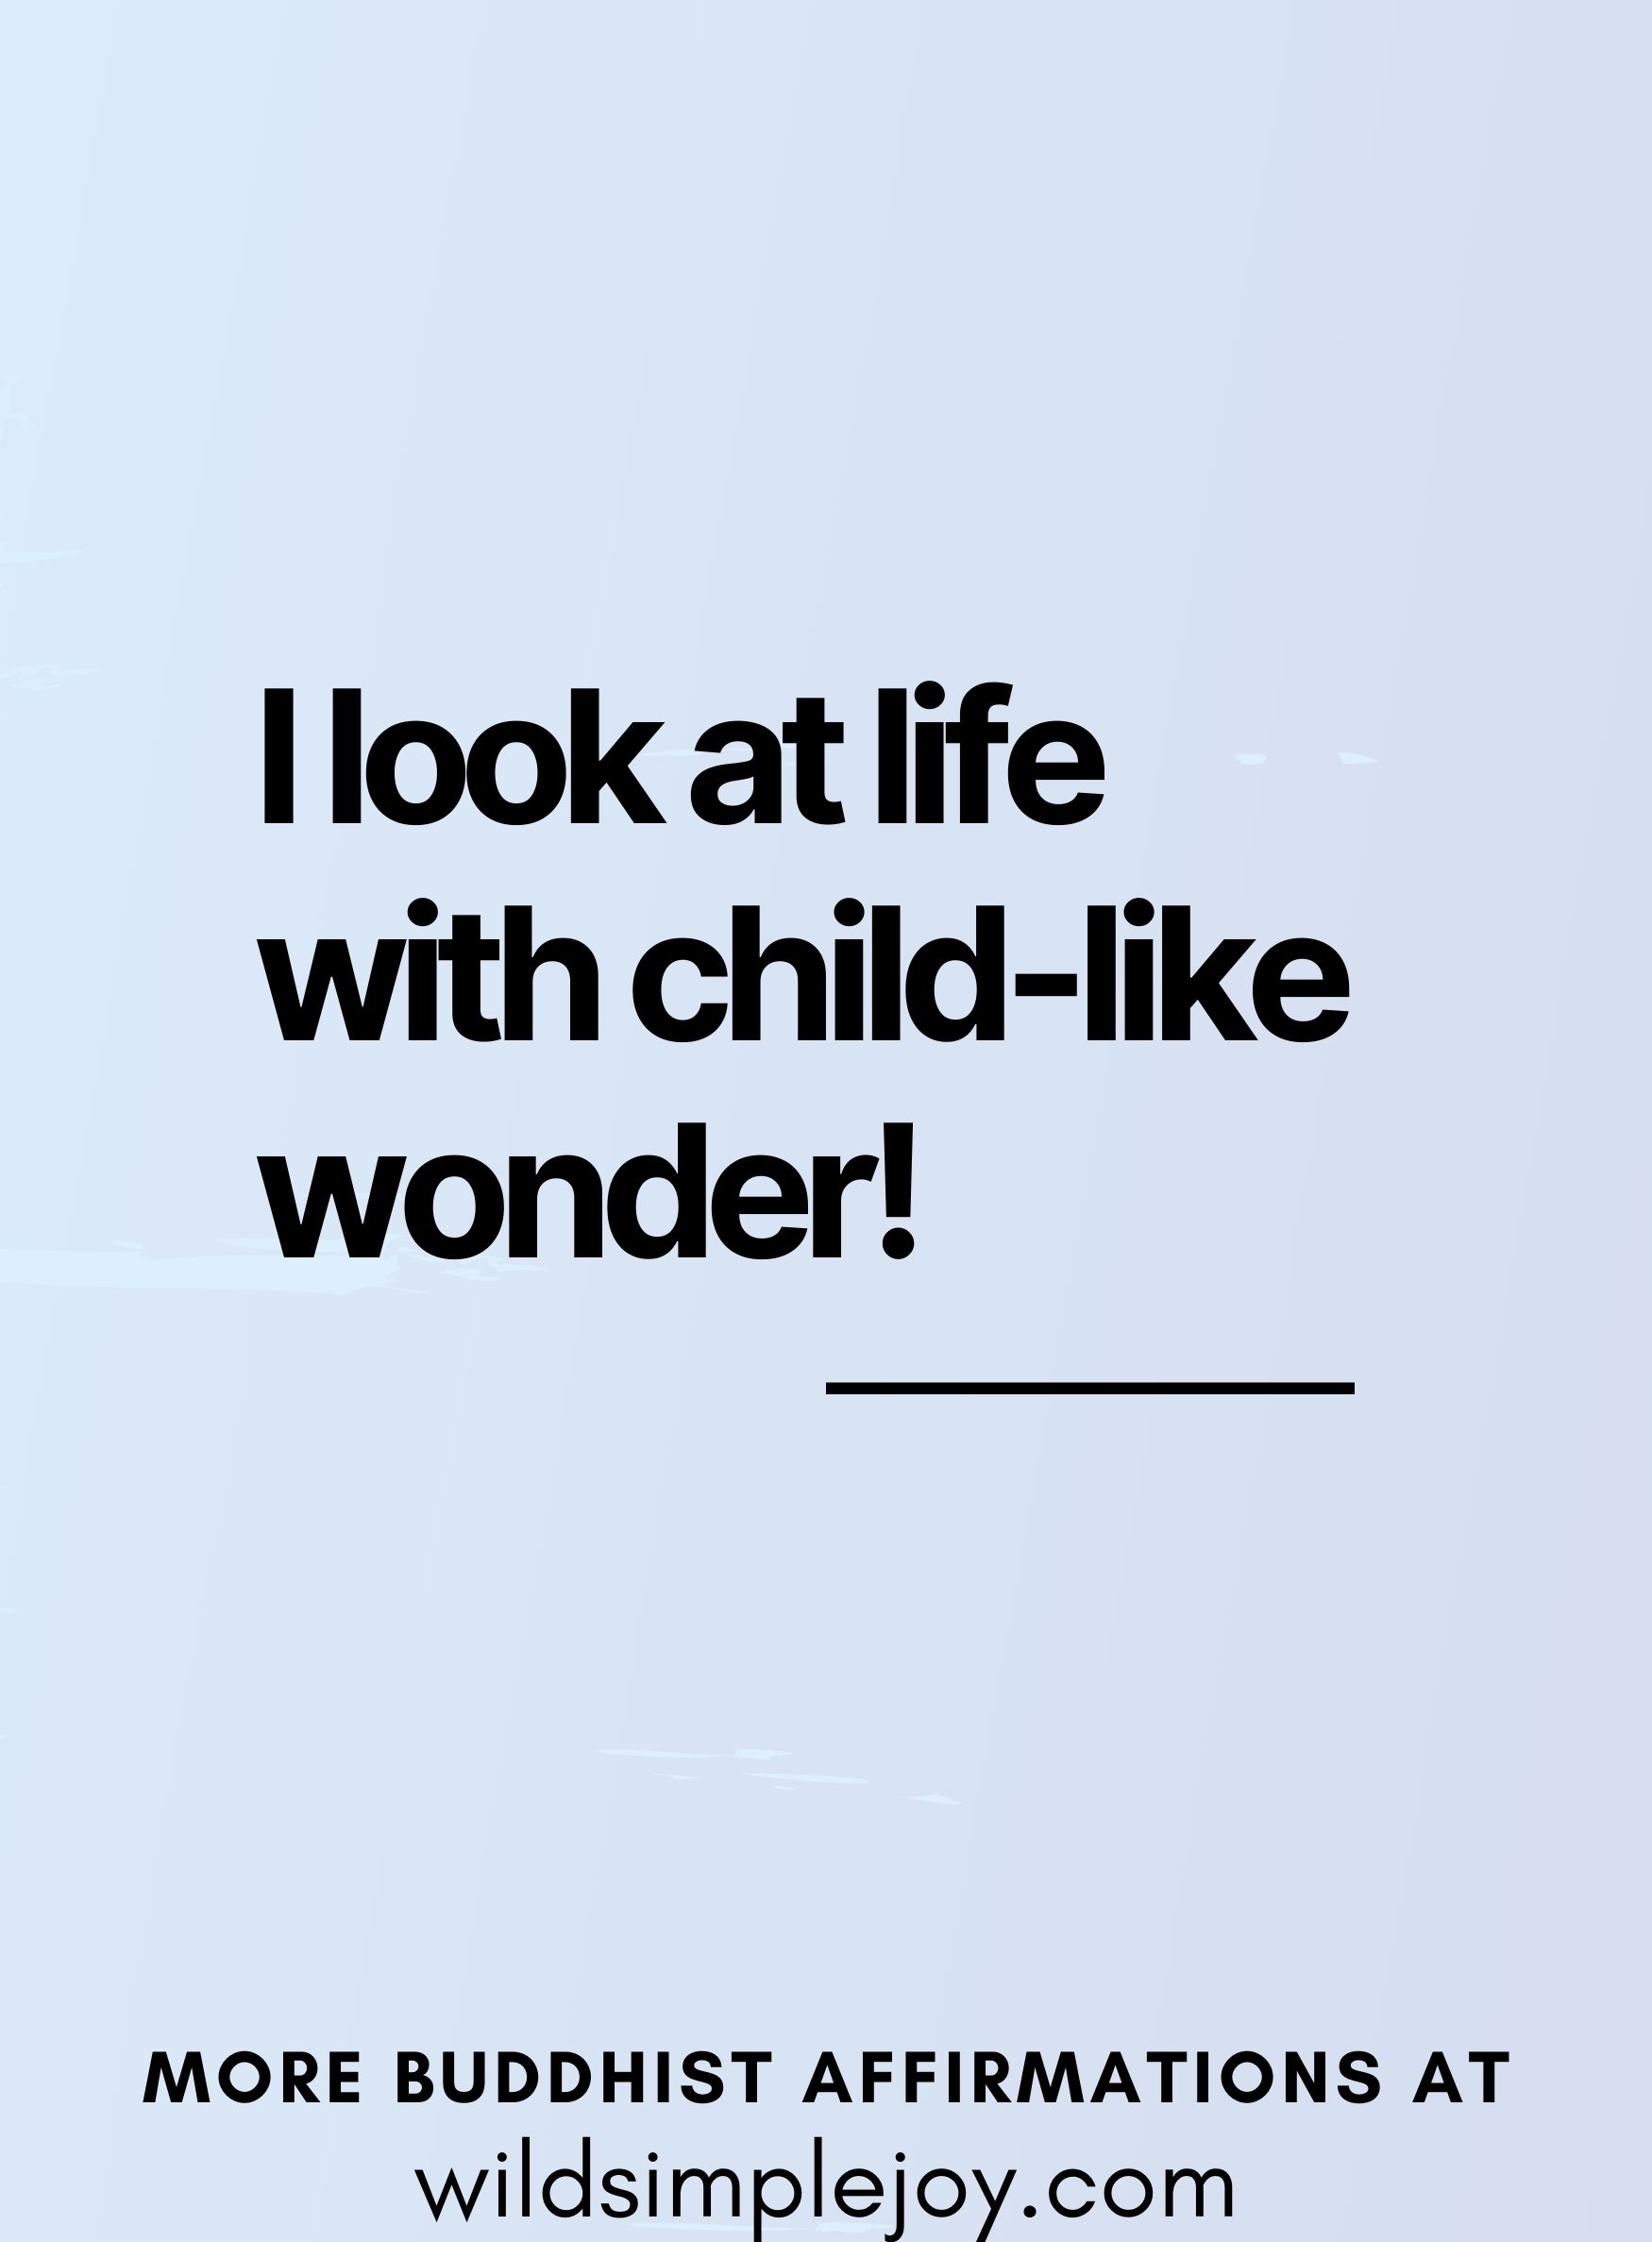 I look at life with a child-like wonder! (blue and purple background)